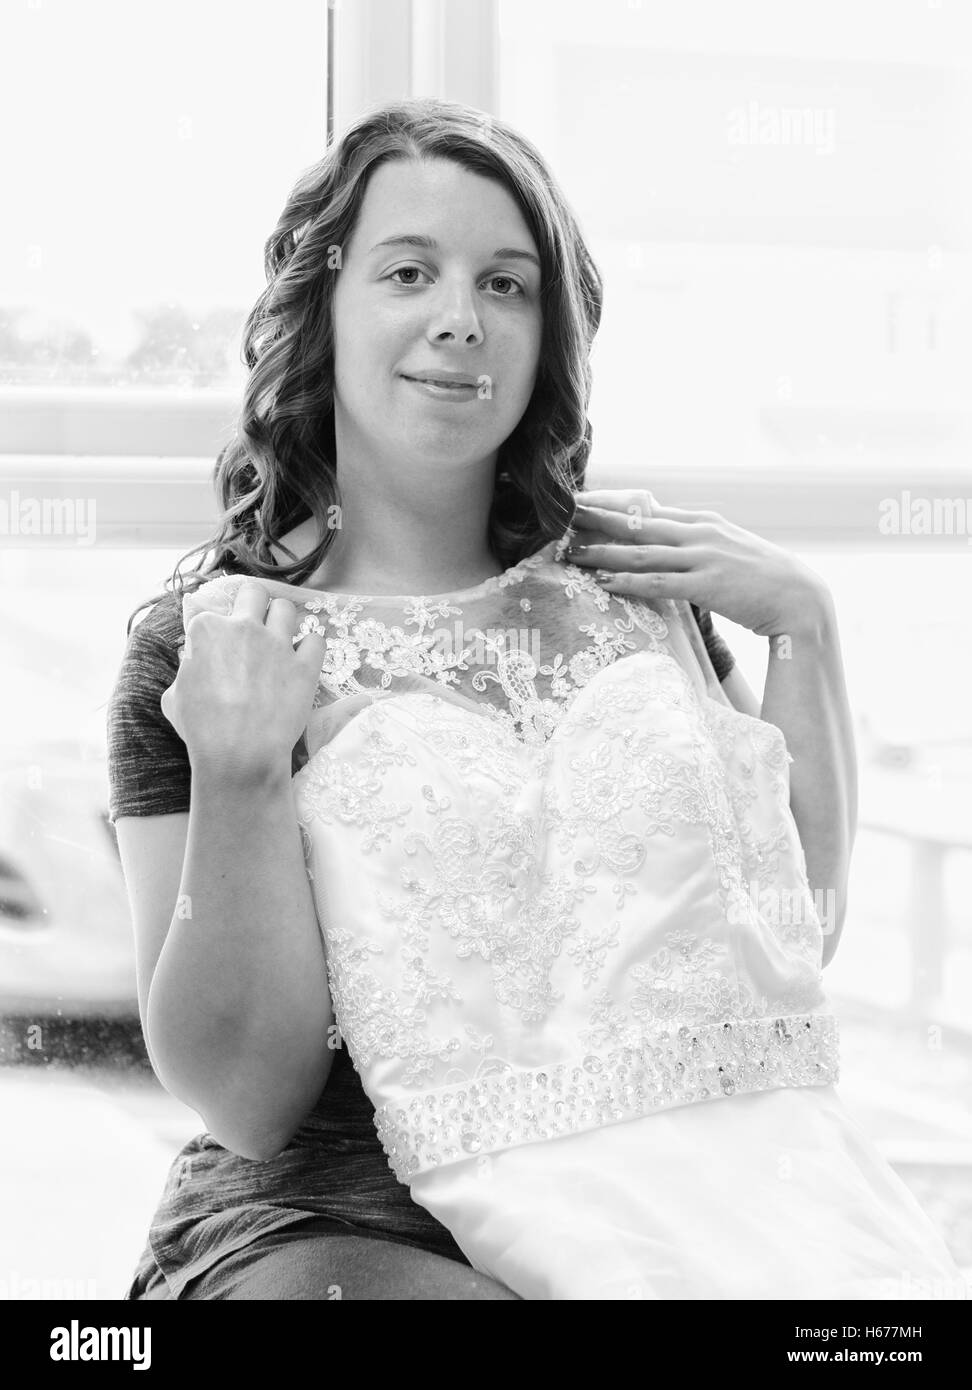 Excited bride to be holding up her wedding dress, taken in vertical format in black and white Stock Photo